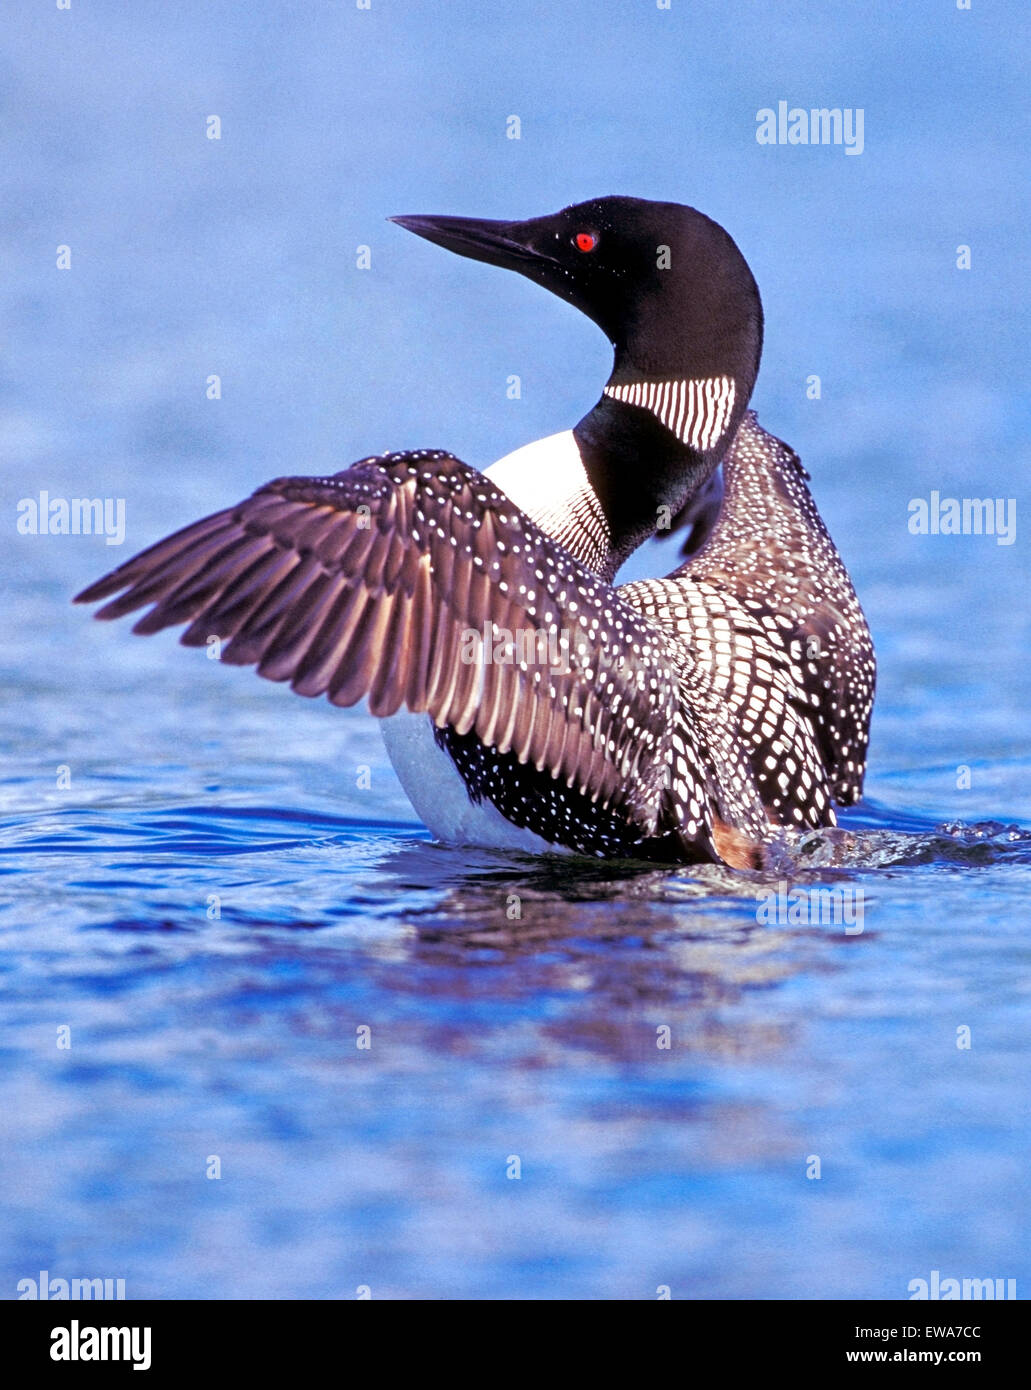 Common Loon or Great Northern Diver wings spread Stock Photo